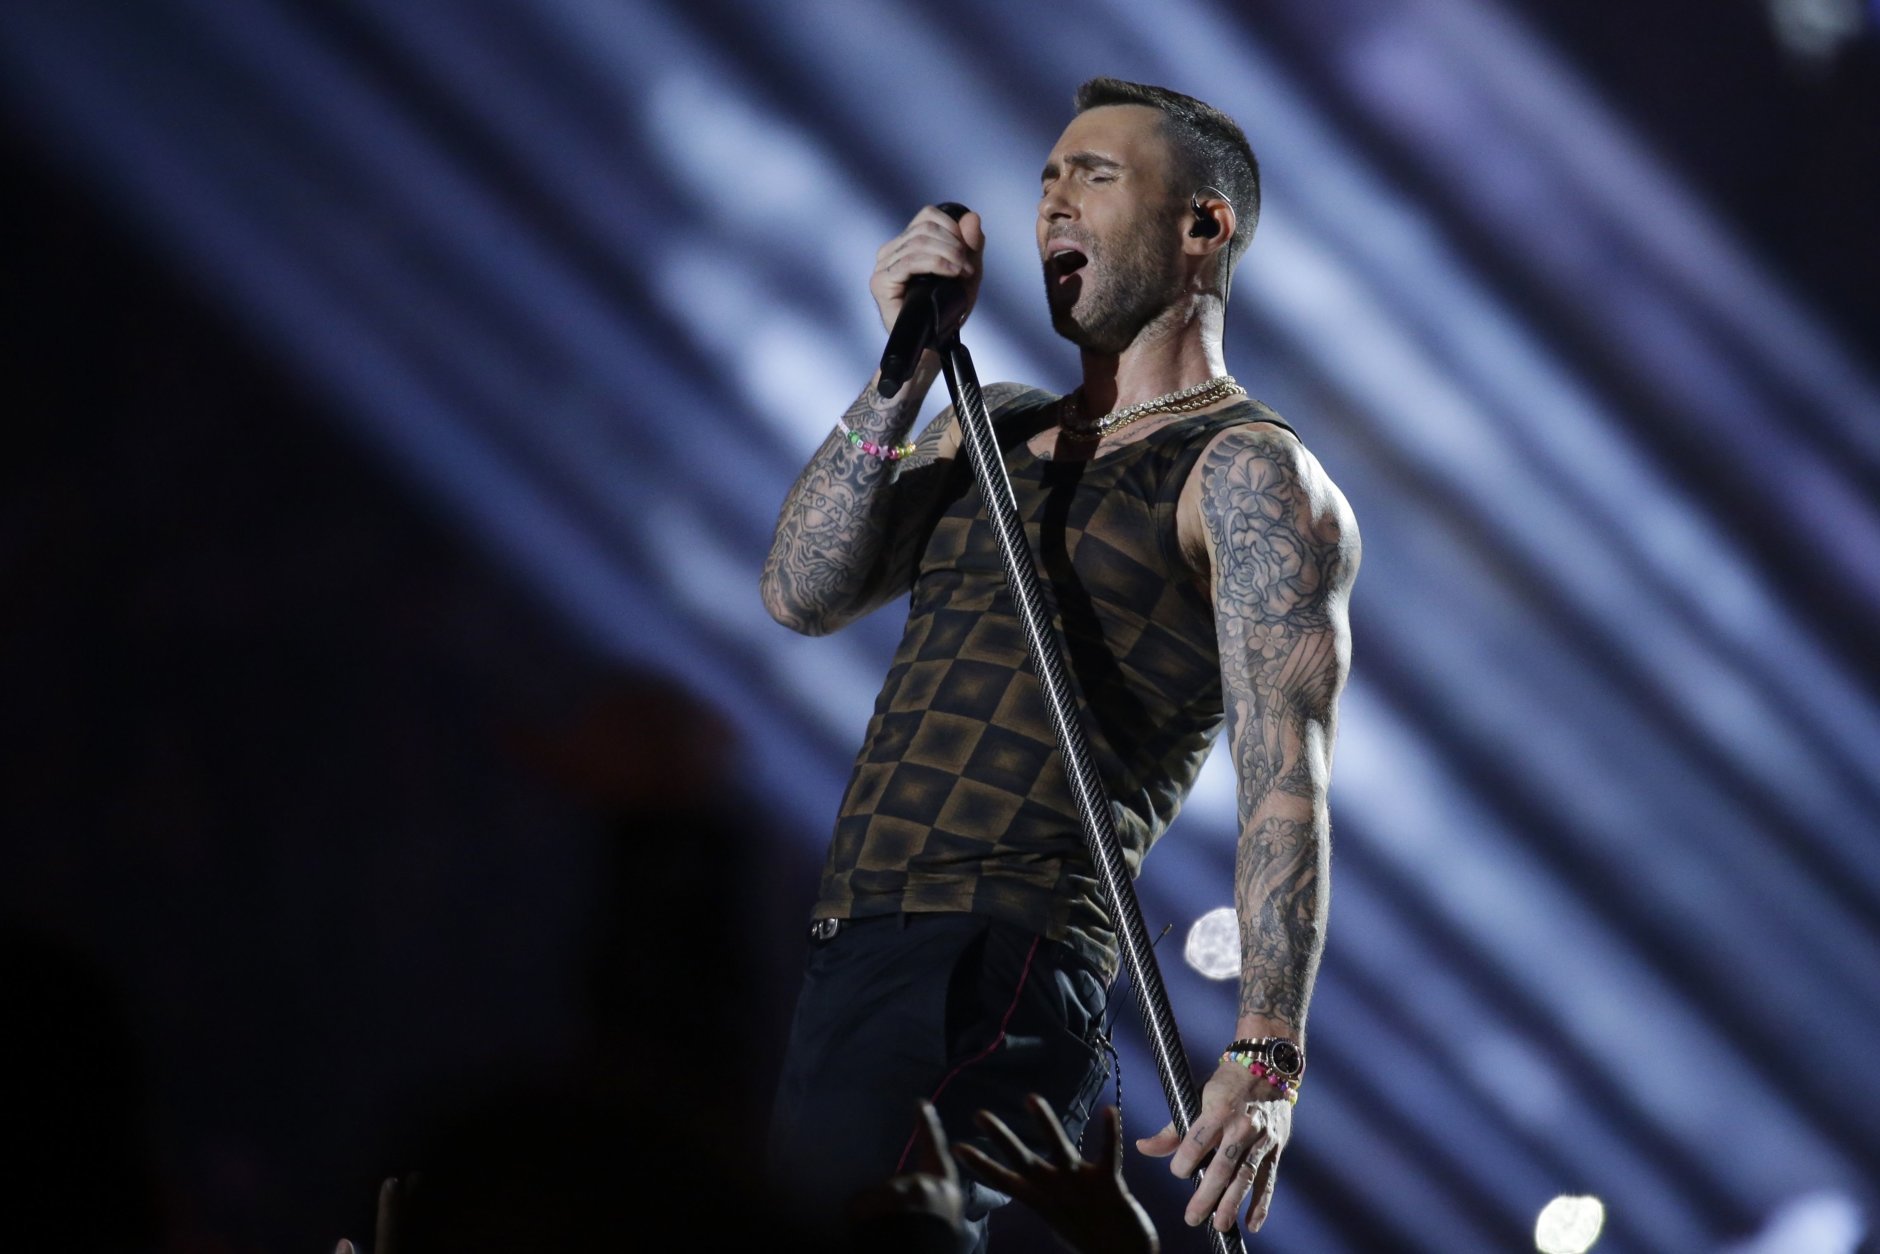 Adam Levine of Maroon 5 performs during halftime of the NFL Super Bowl 53 football game between the Los Angeles Rams and the New England Patriots Sunday, Feb. 3, 2019, in Atlanta. (AP Photo/Mark Humphrey)